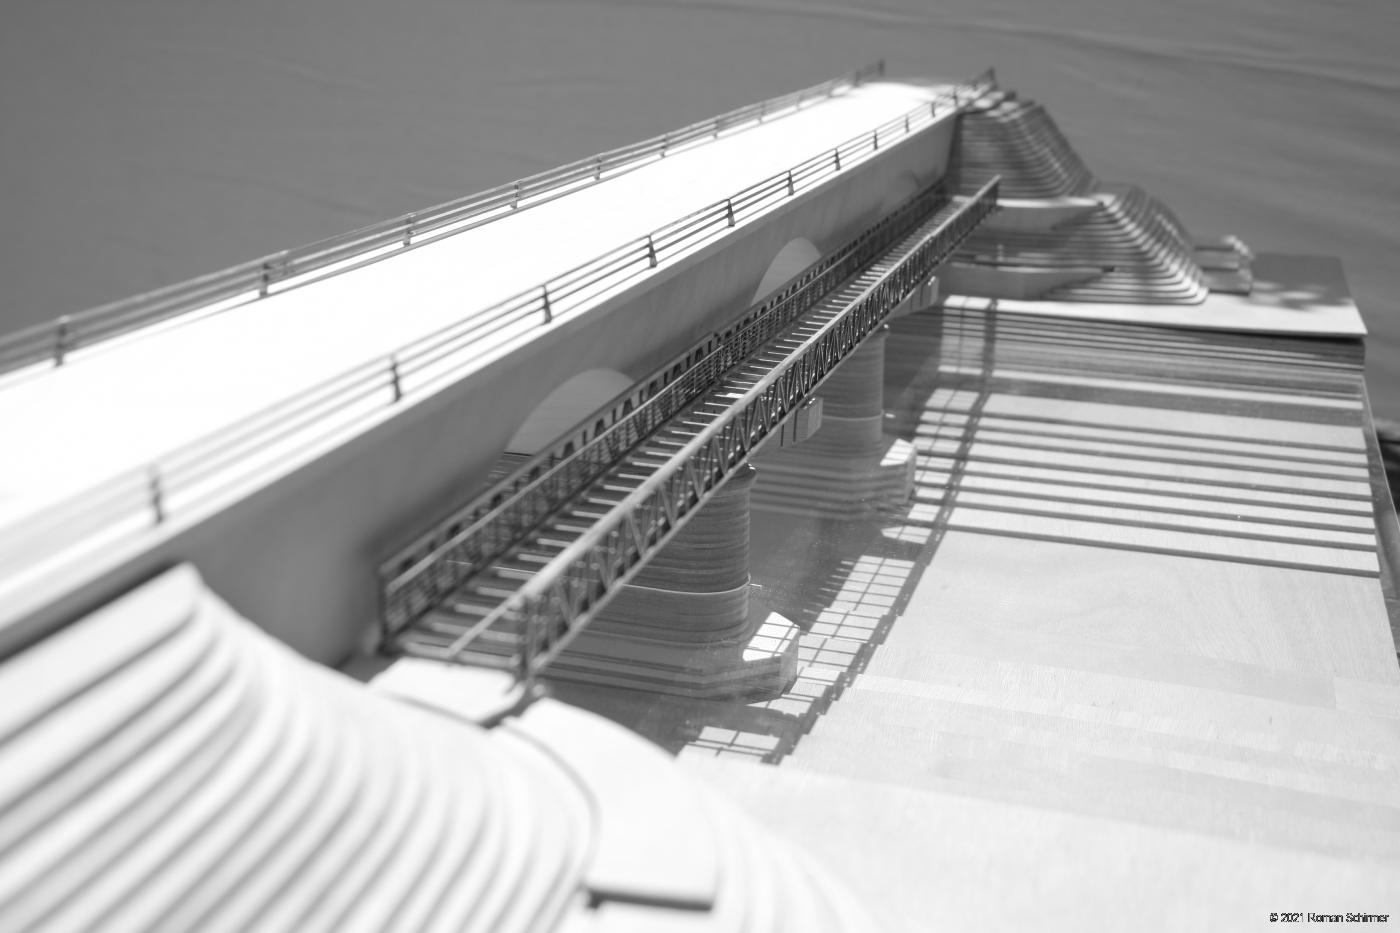 Model of the Bridge of Chateau Gontier